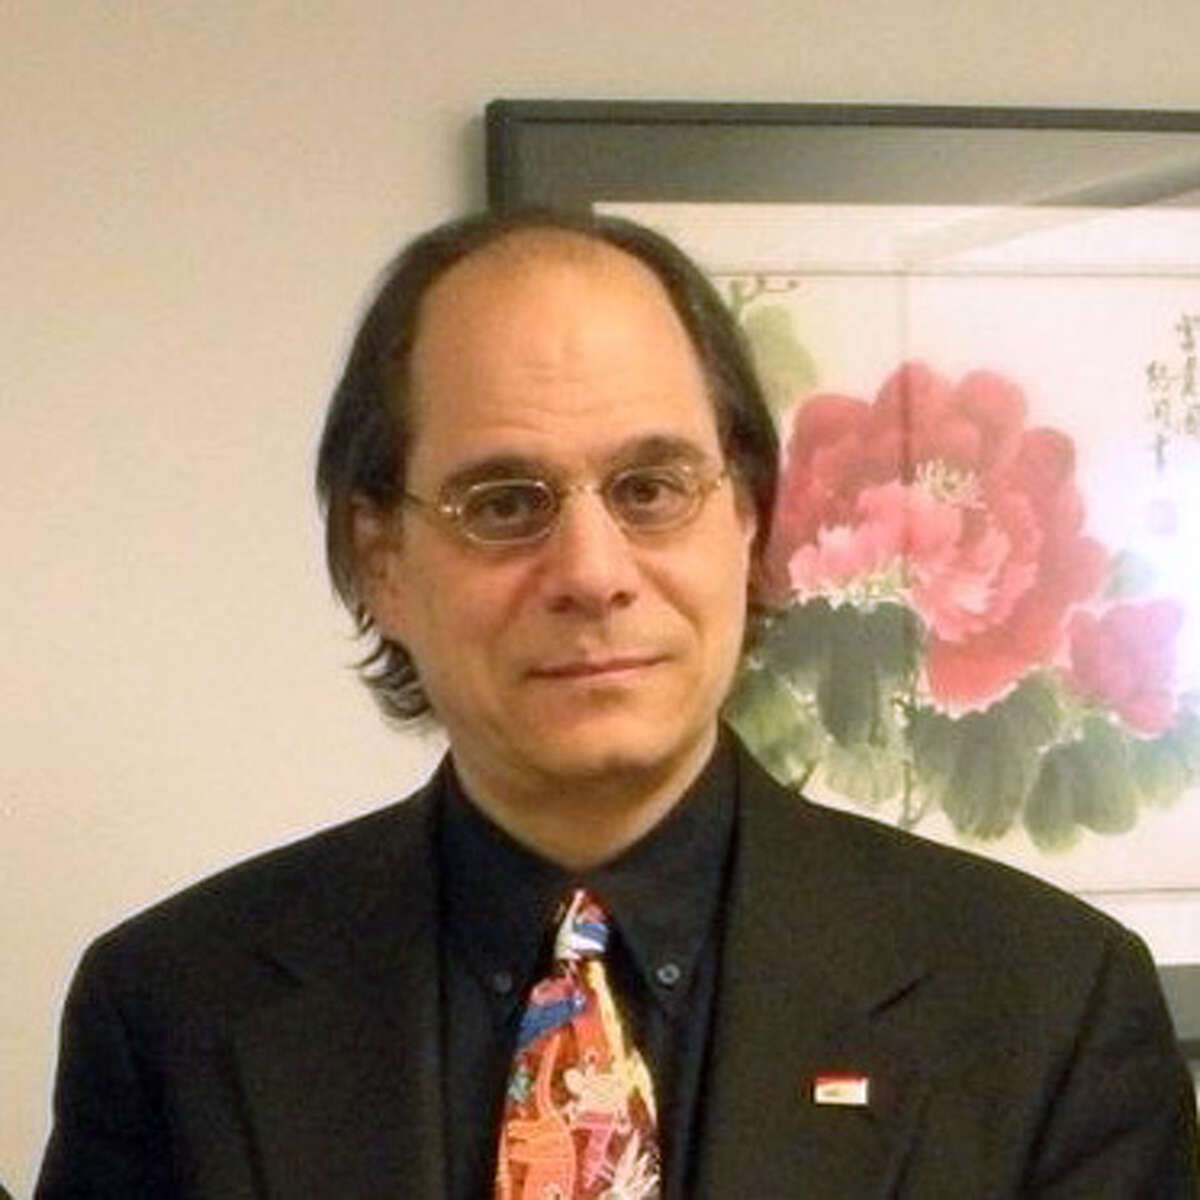 Dr. Mitch Leventhal, SUNY Vice Chancellor of Global Affairs, 2009. (Times Union)